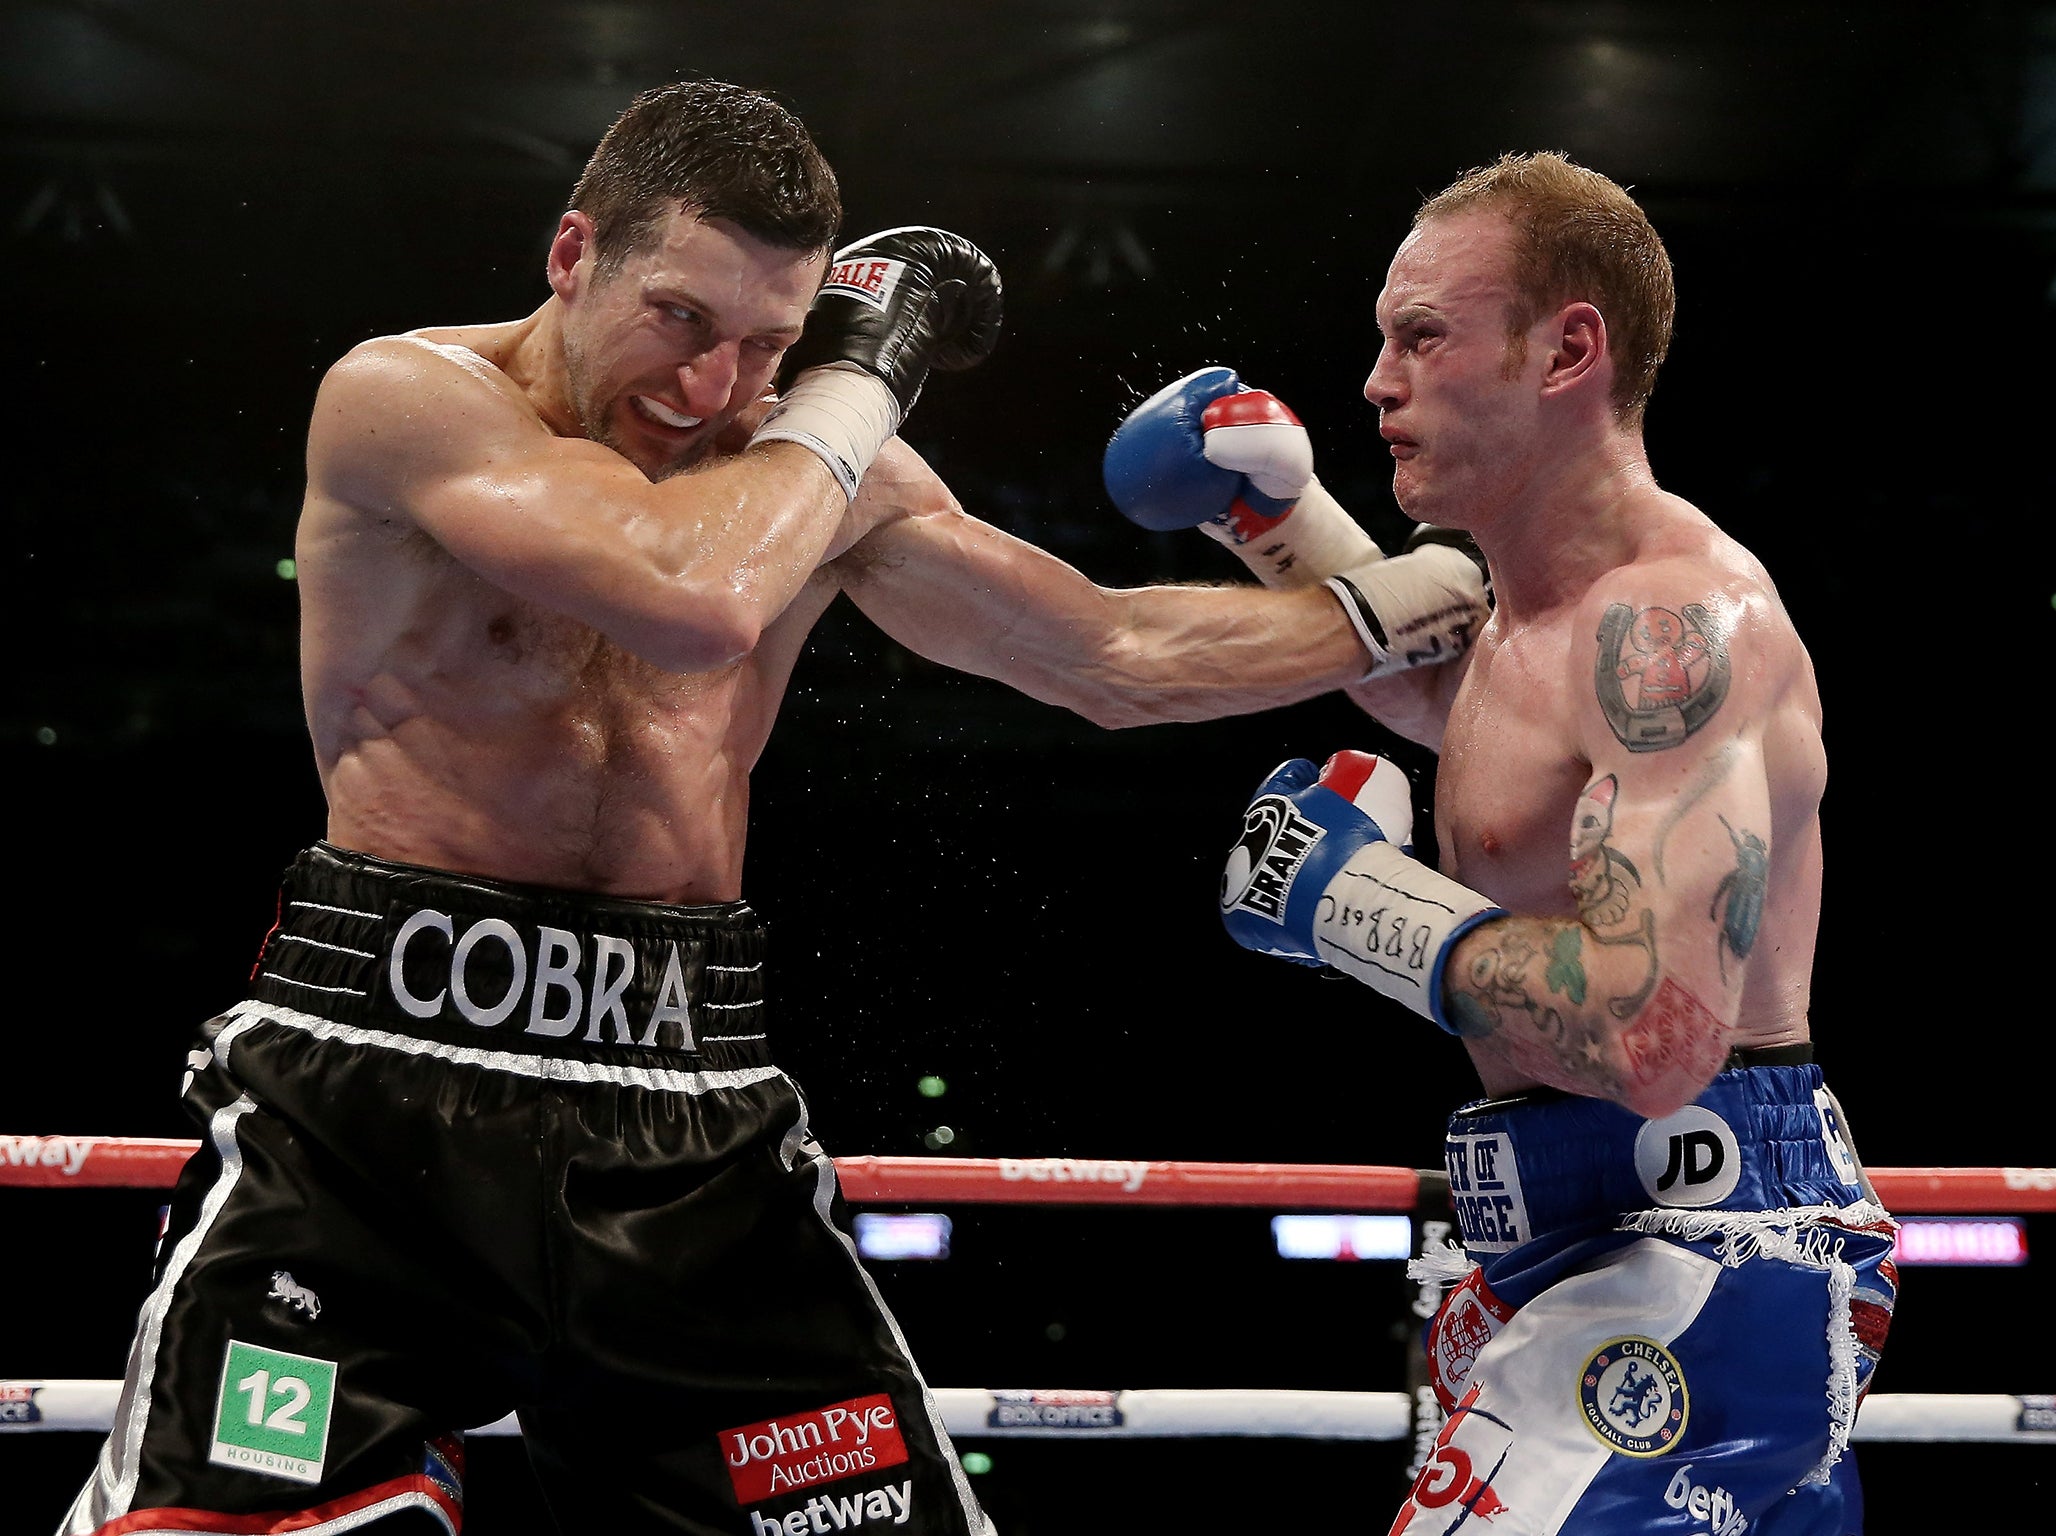 Groves lost twice to bitter rival Froch